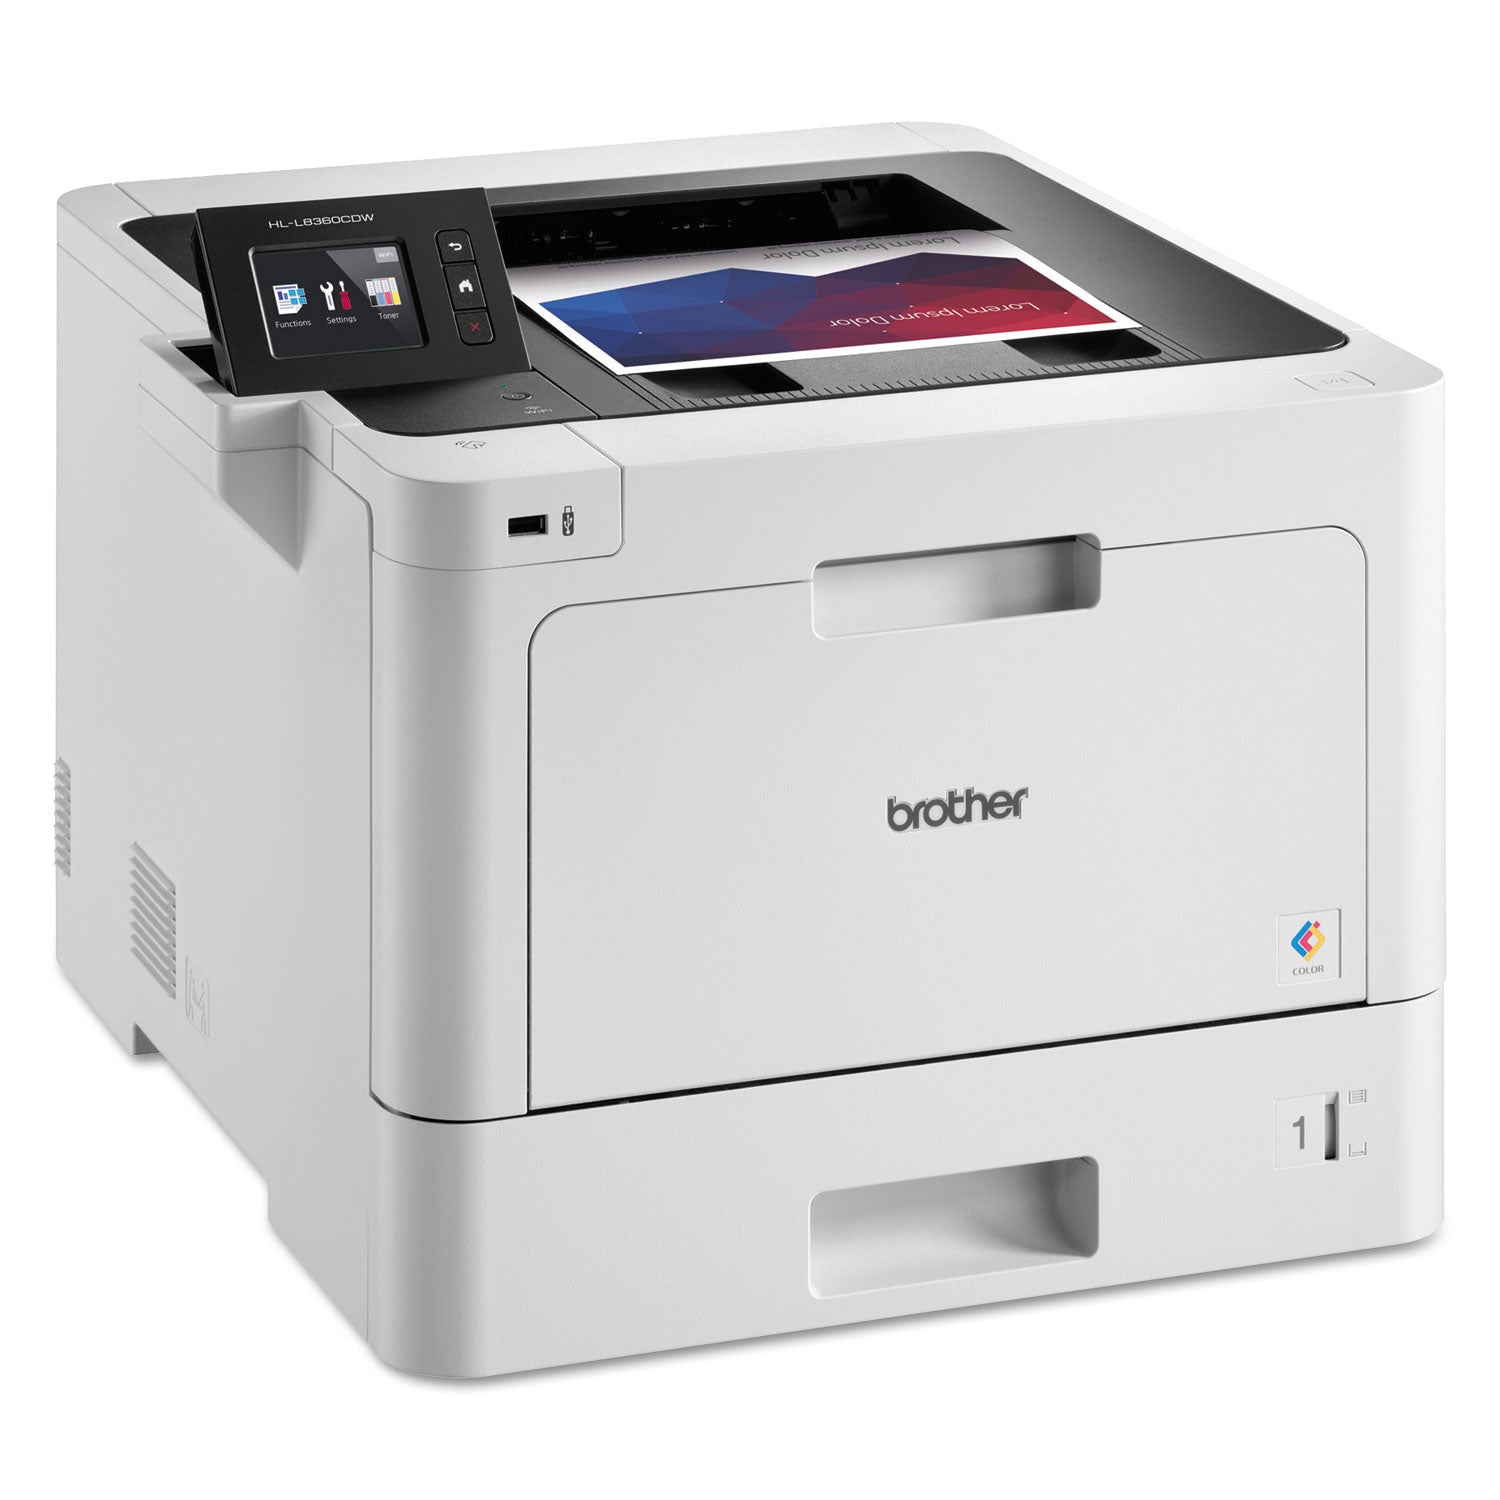 hll8360cdw-business-color-laser-printer-with-duplex-printing-and-wireless-networking_brthll8360cdw - 3